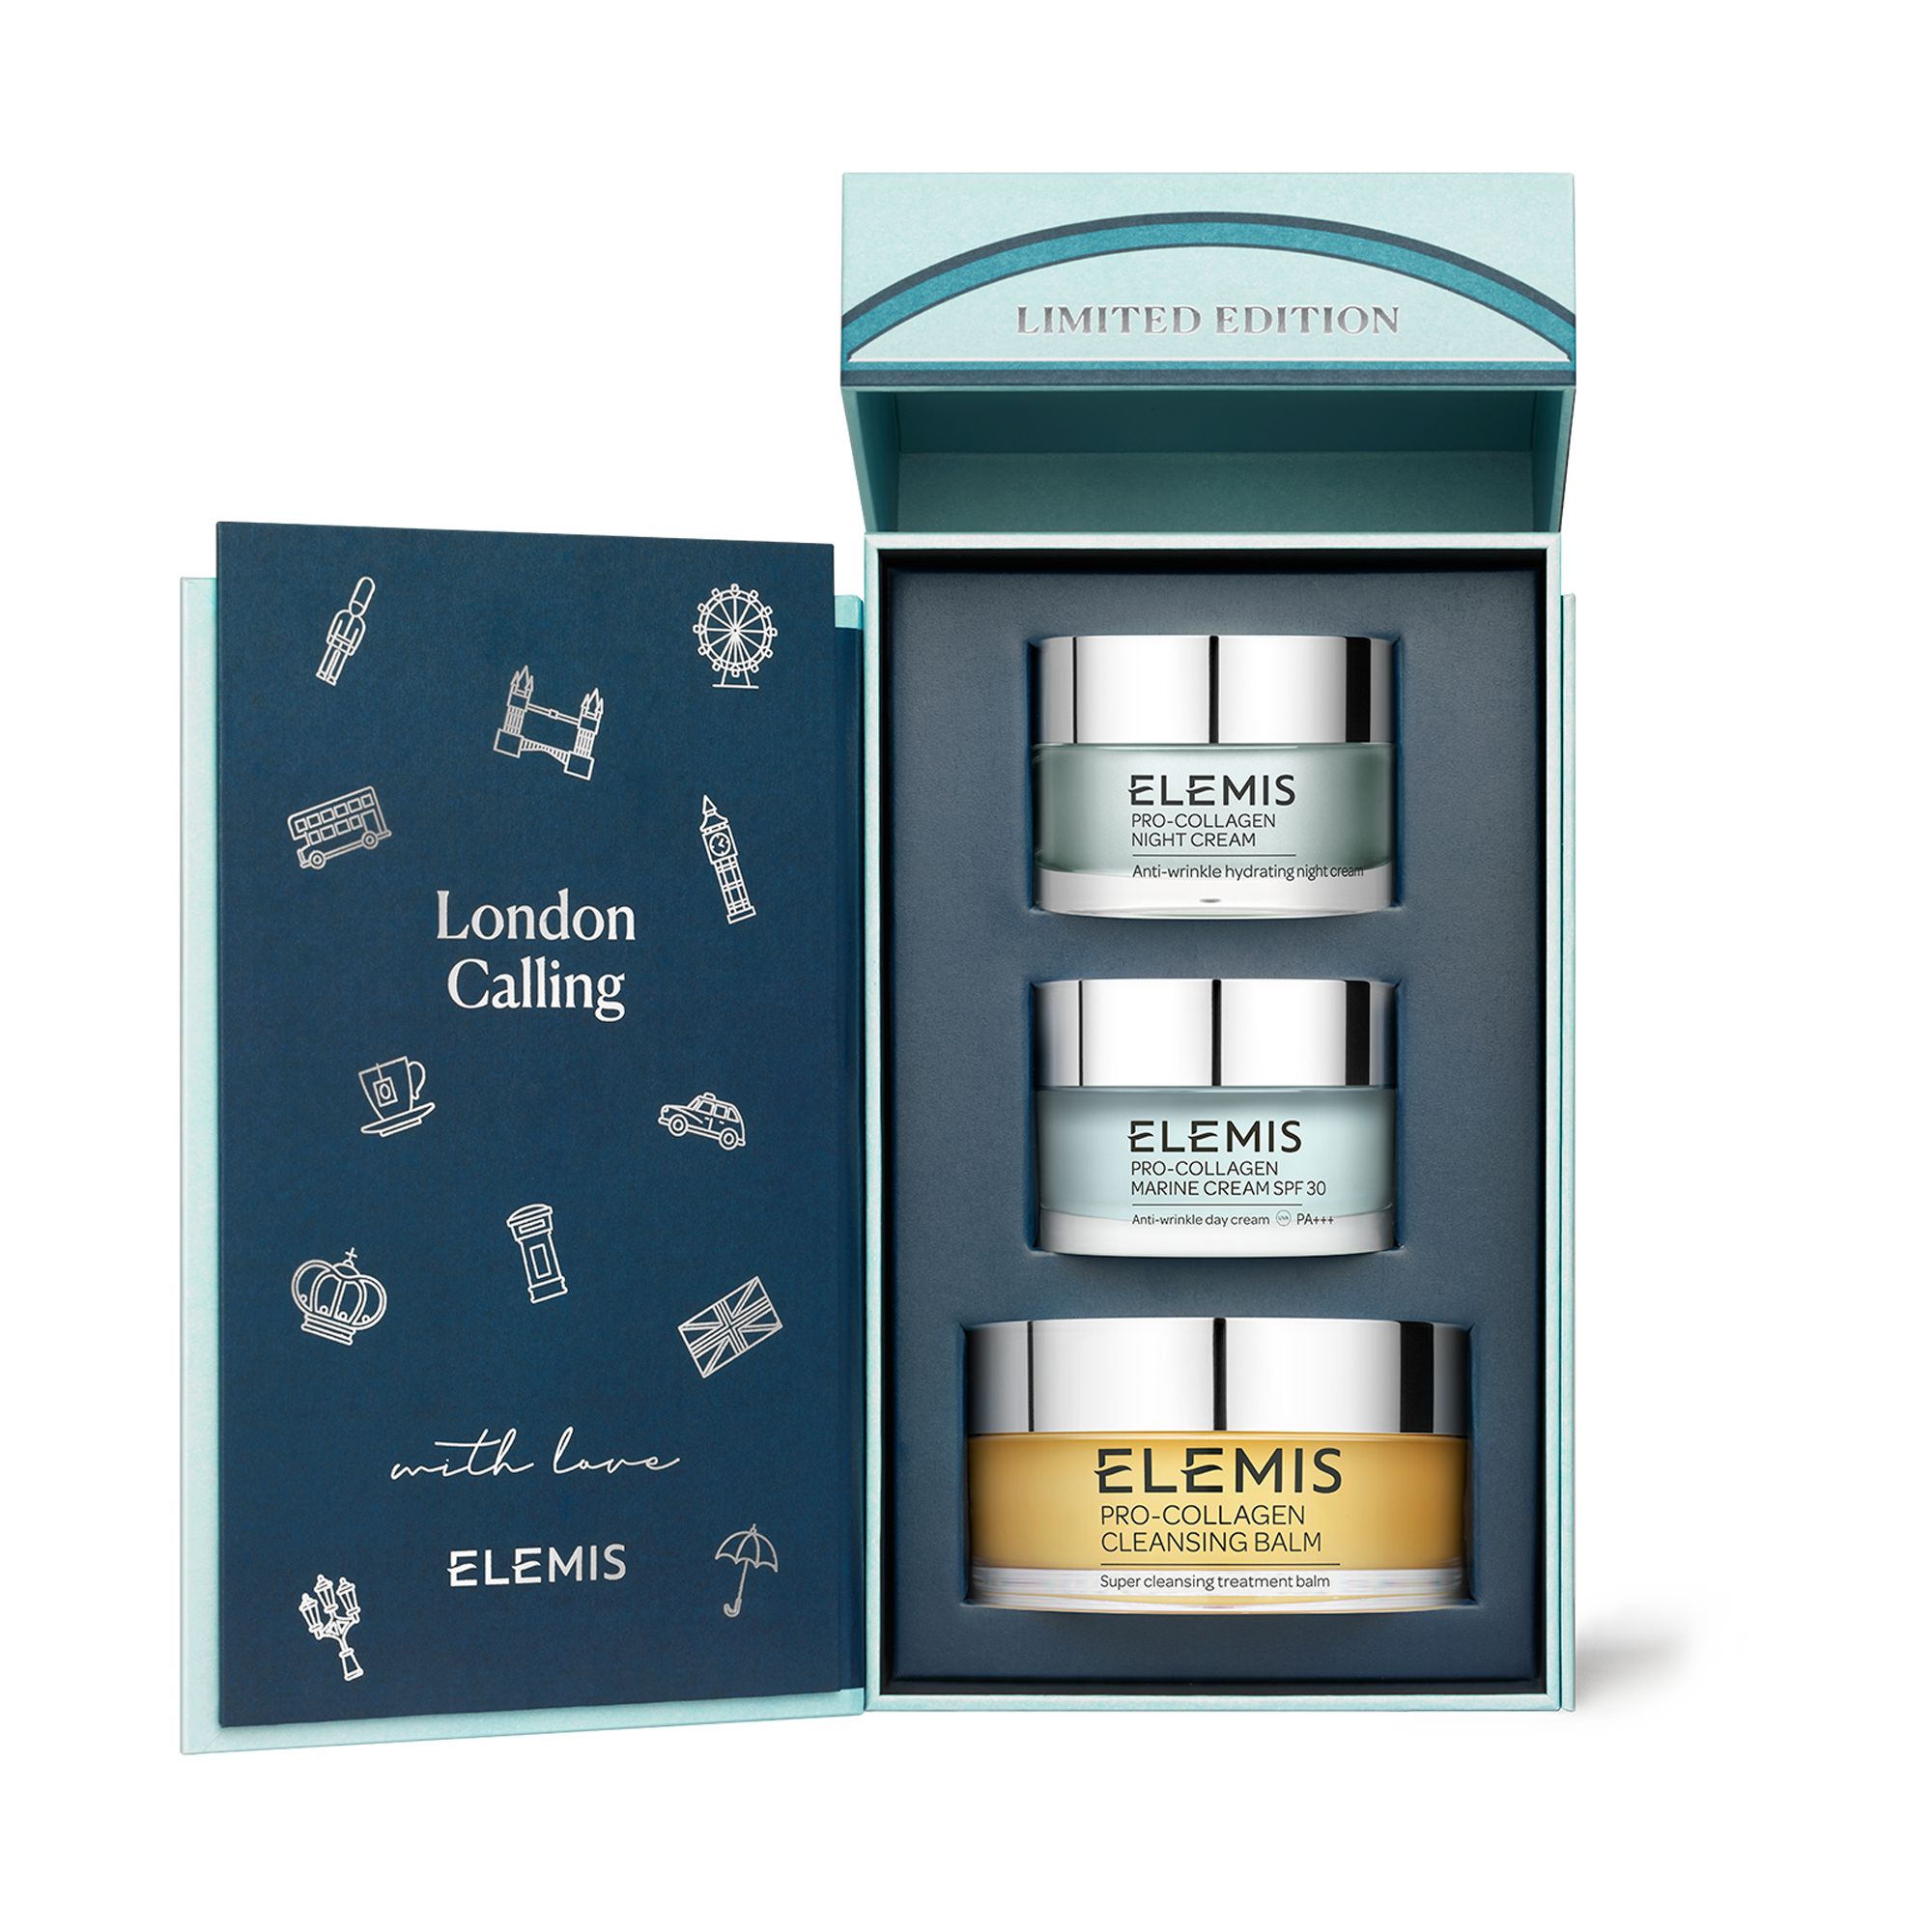 Celebrate the Best of British skincare with our iconic, award-winning Pro-Collagen performers. | Elemis (US)